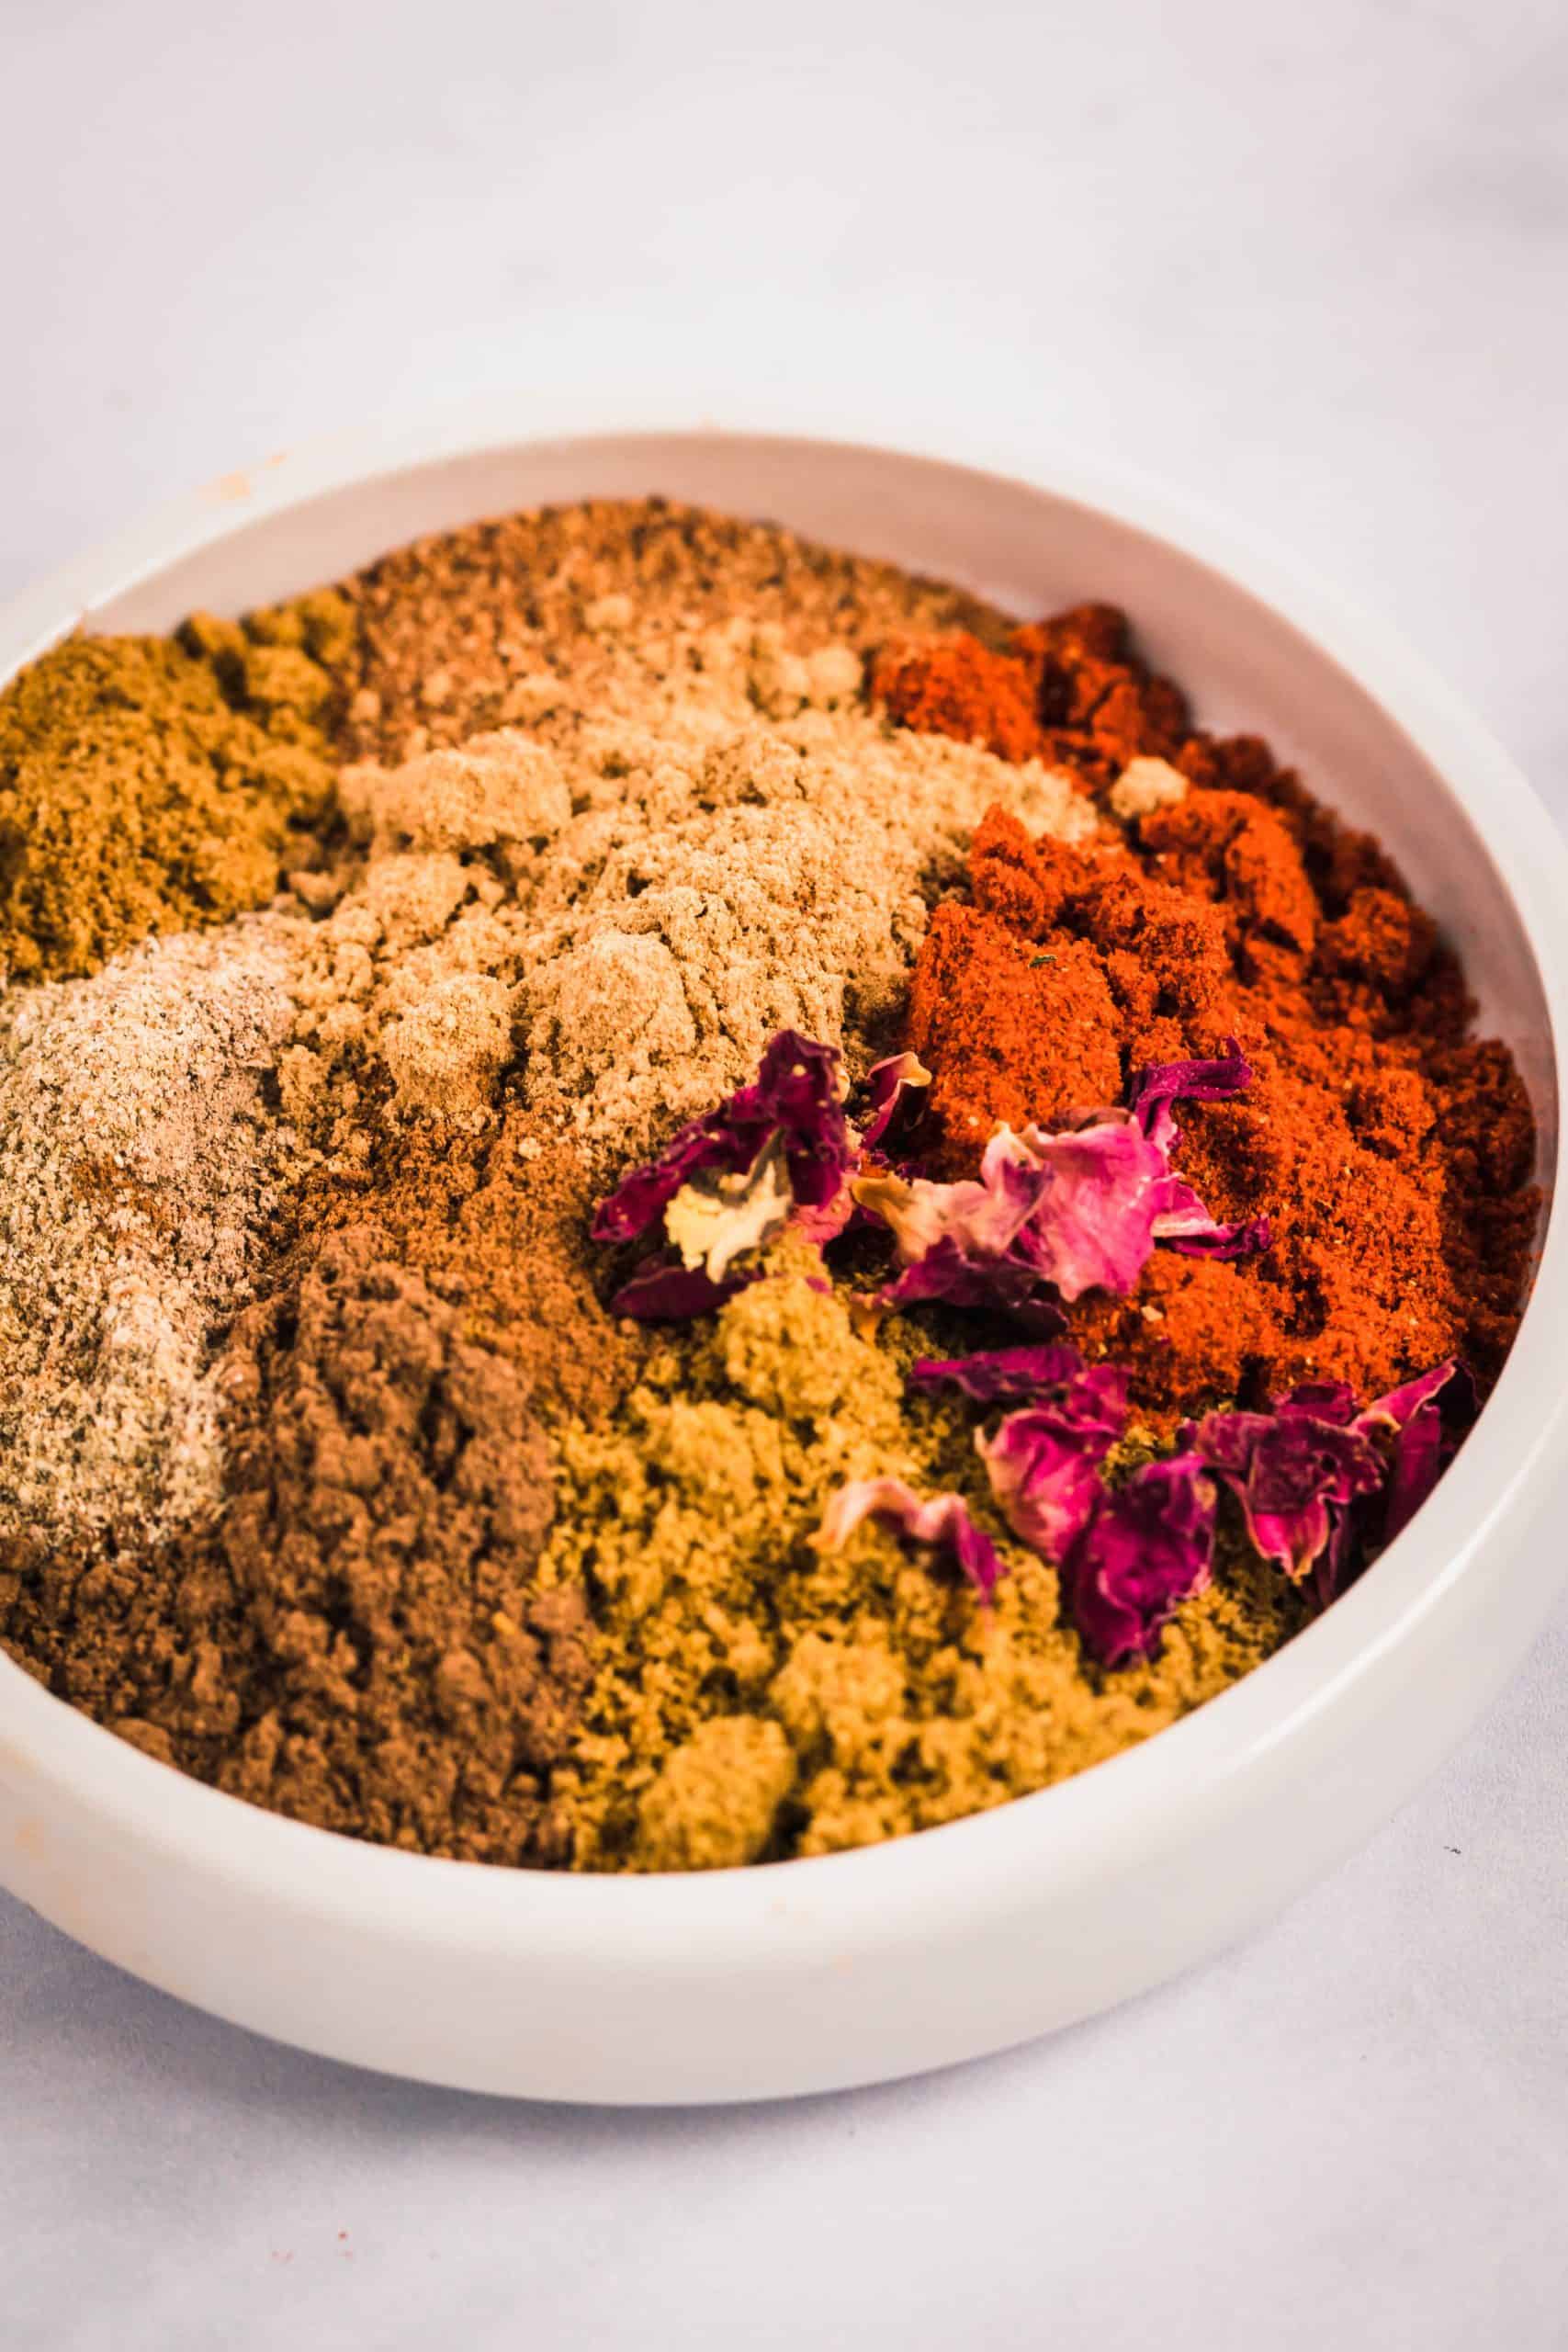 A middle eastern spice blend